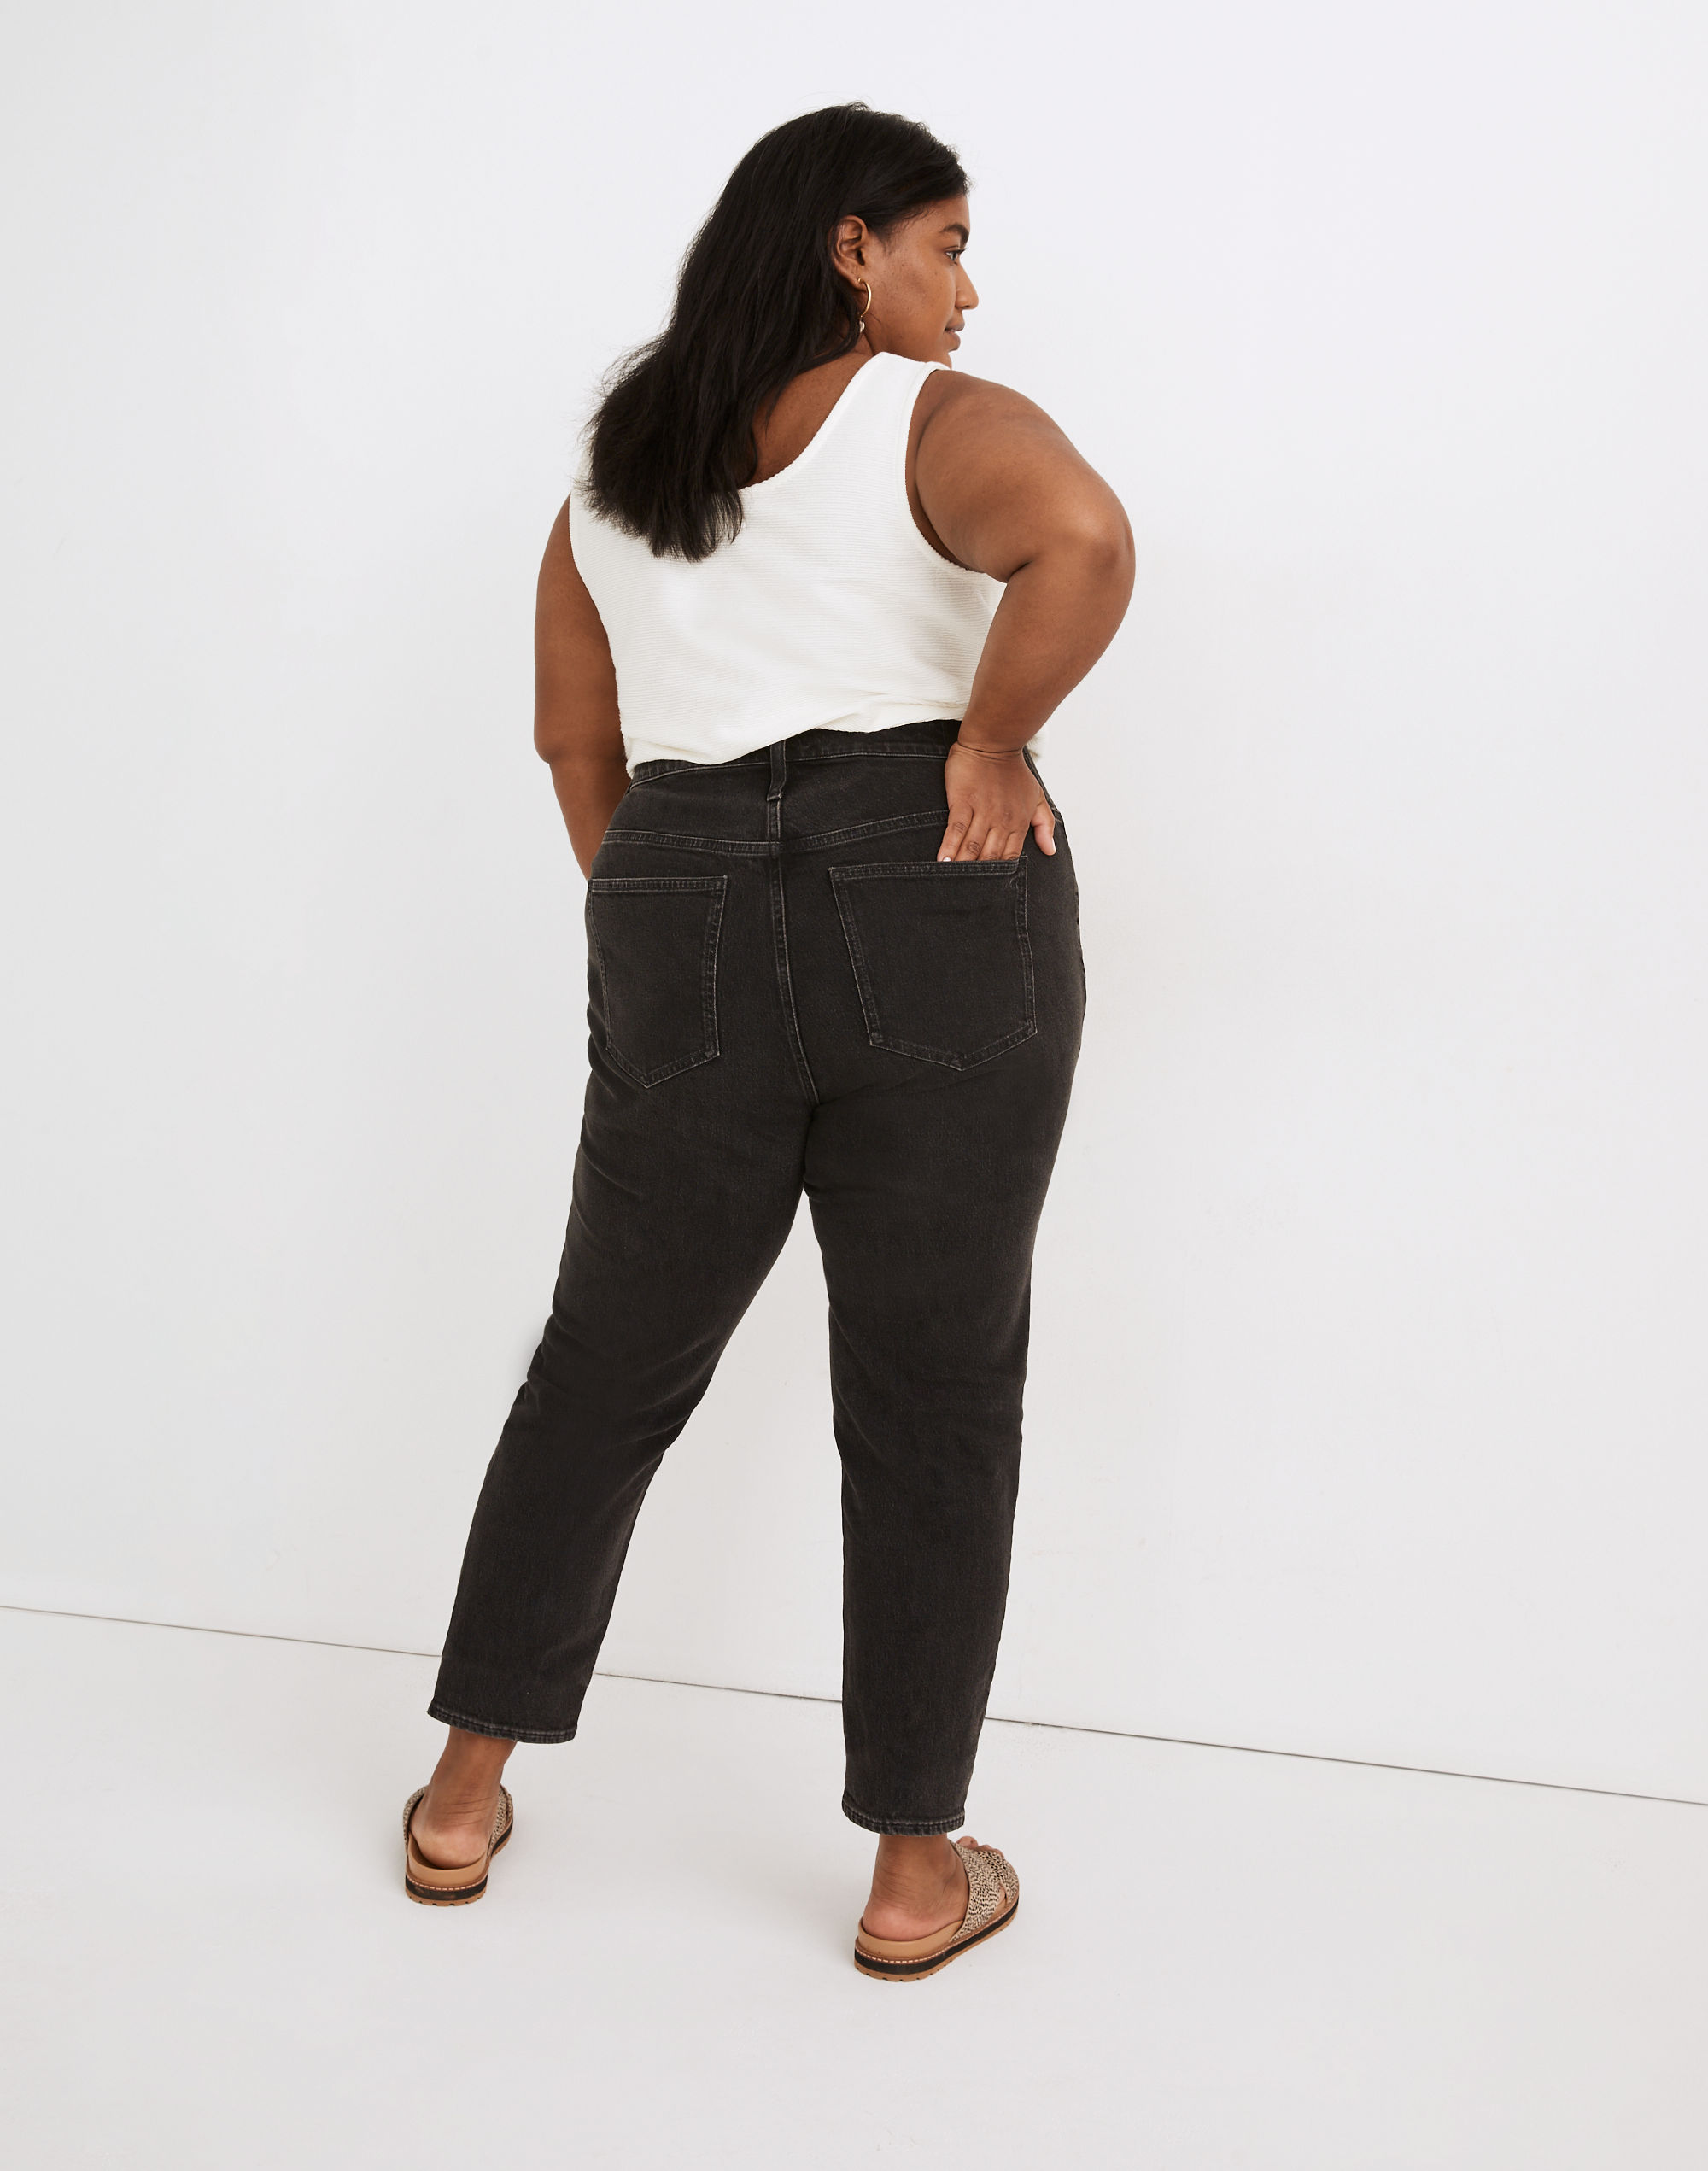 The Plus Perfect Vintage Jean in Lunar Wash